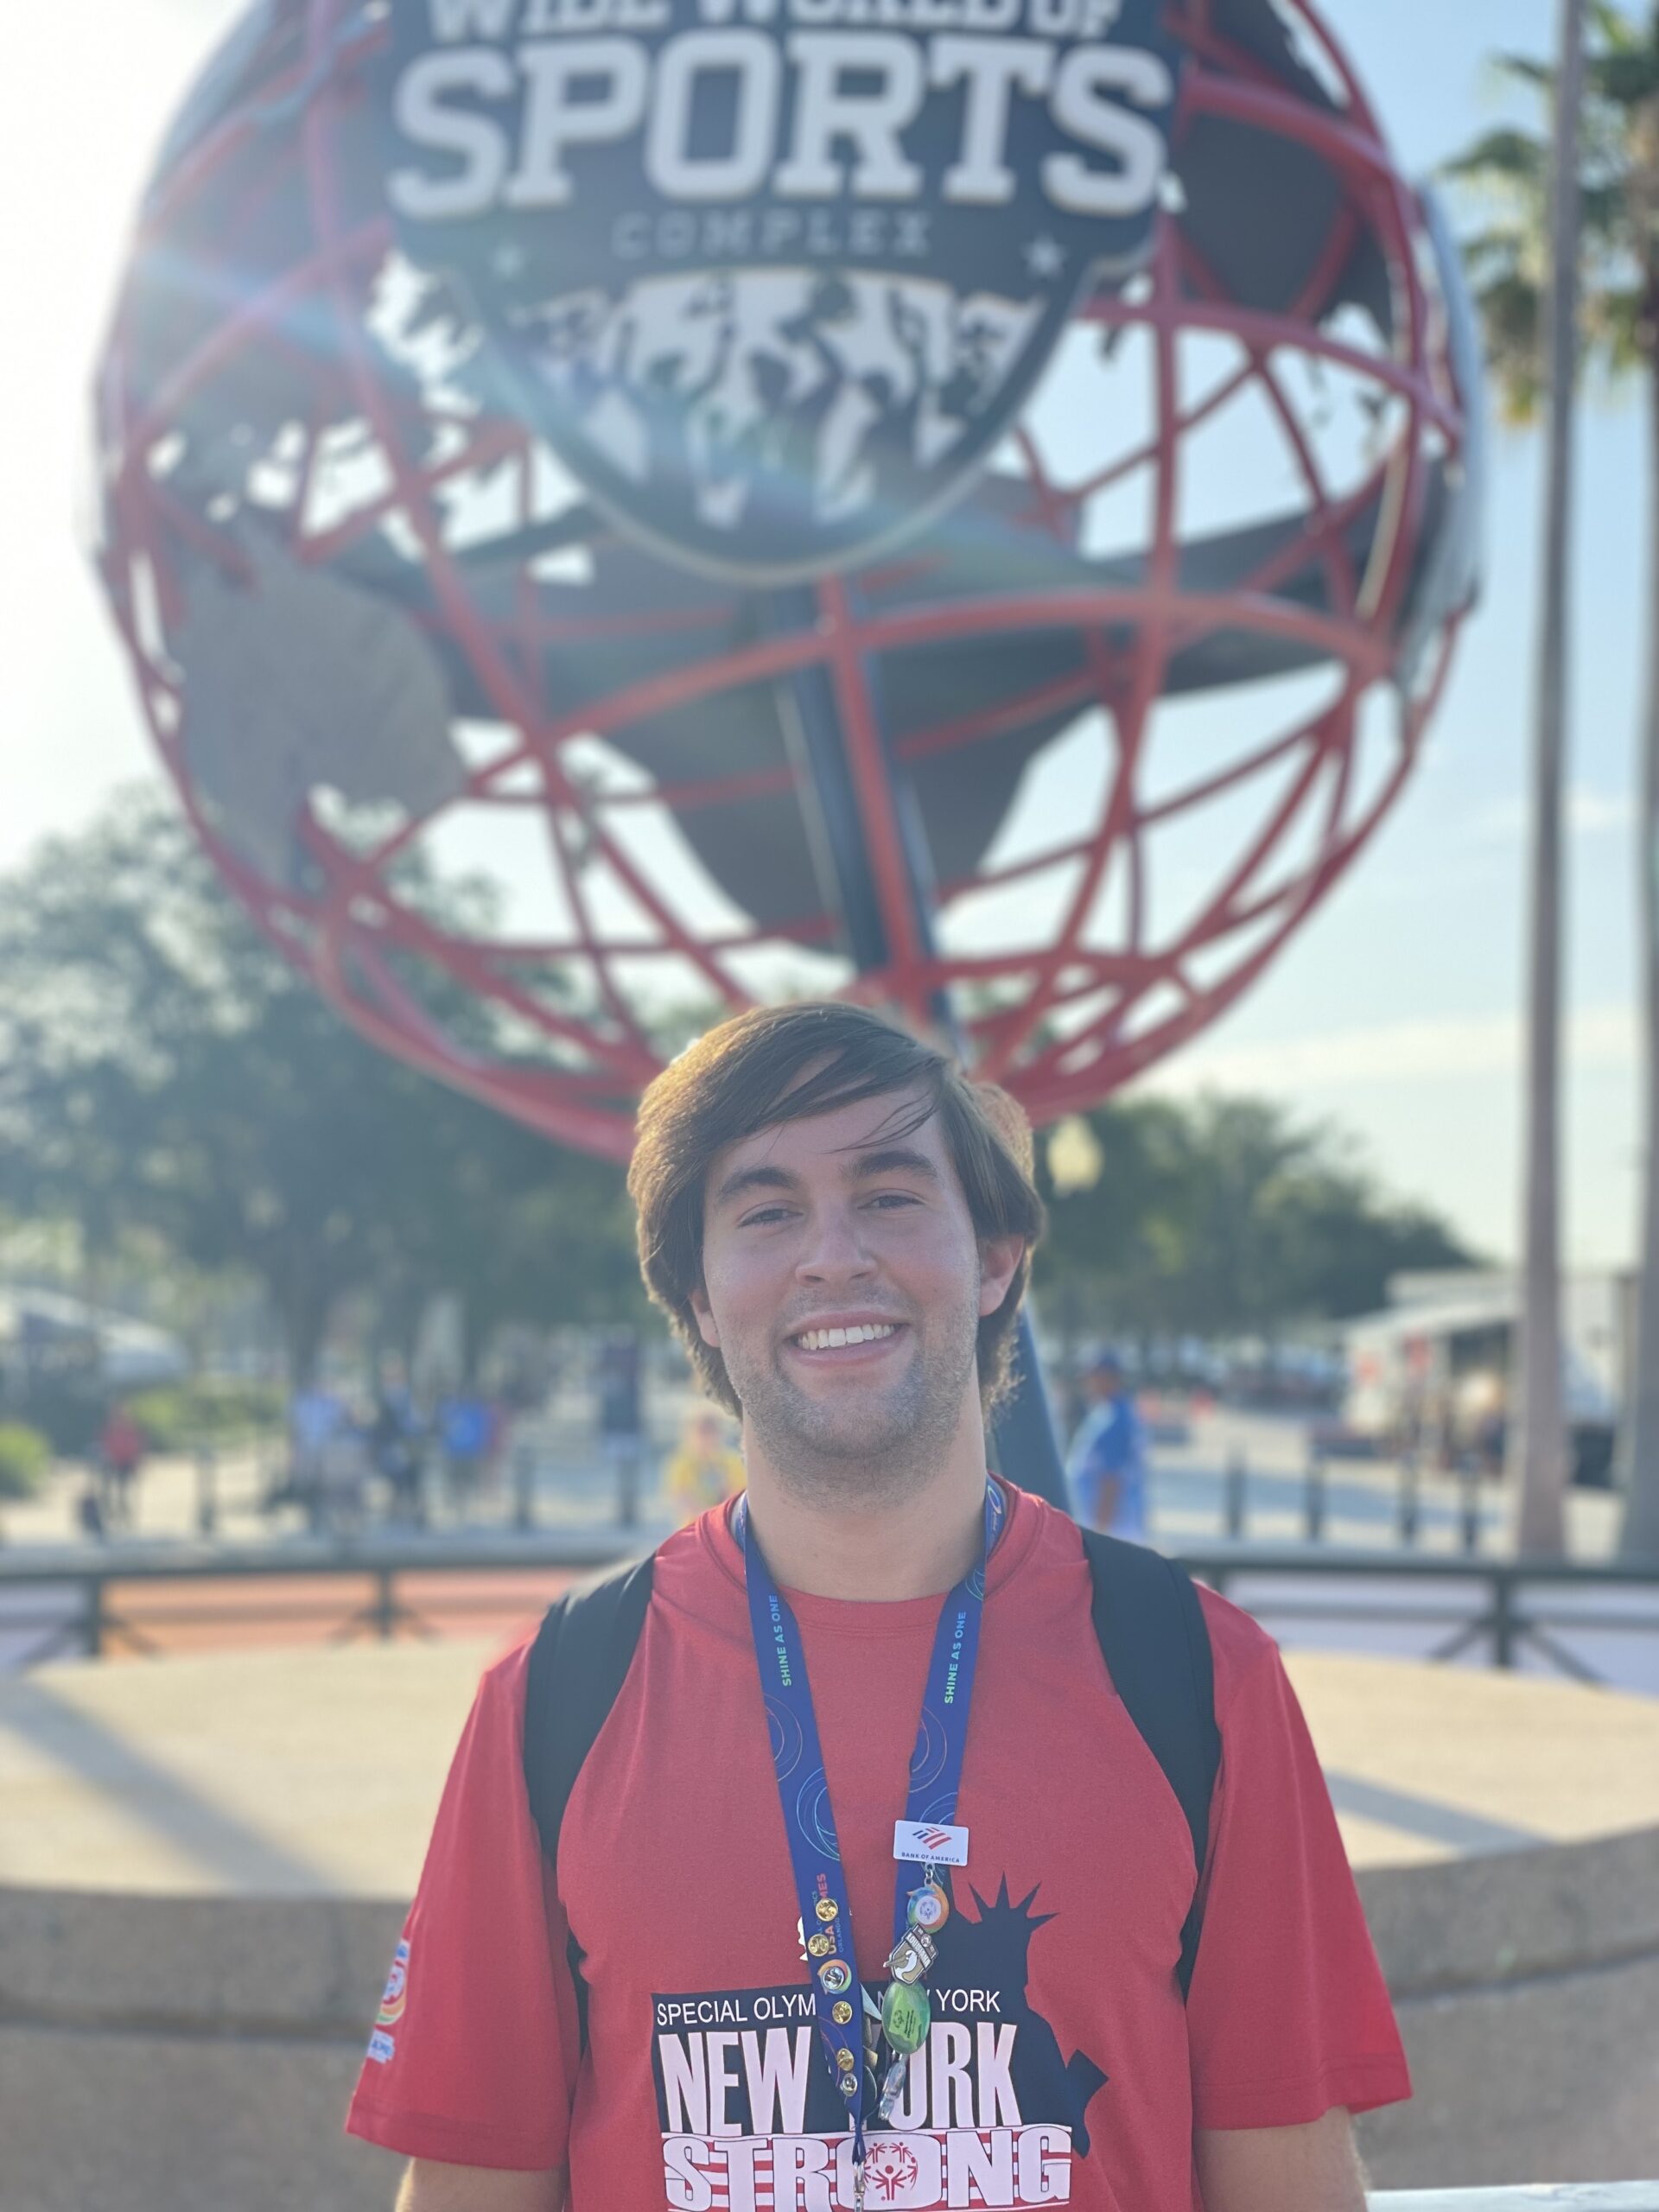 Southampton's William Segarra finished in the top 10 in three events at the Special Olympics USA Games in Orlando, Florida, earlier this month.